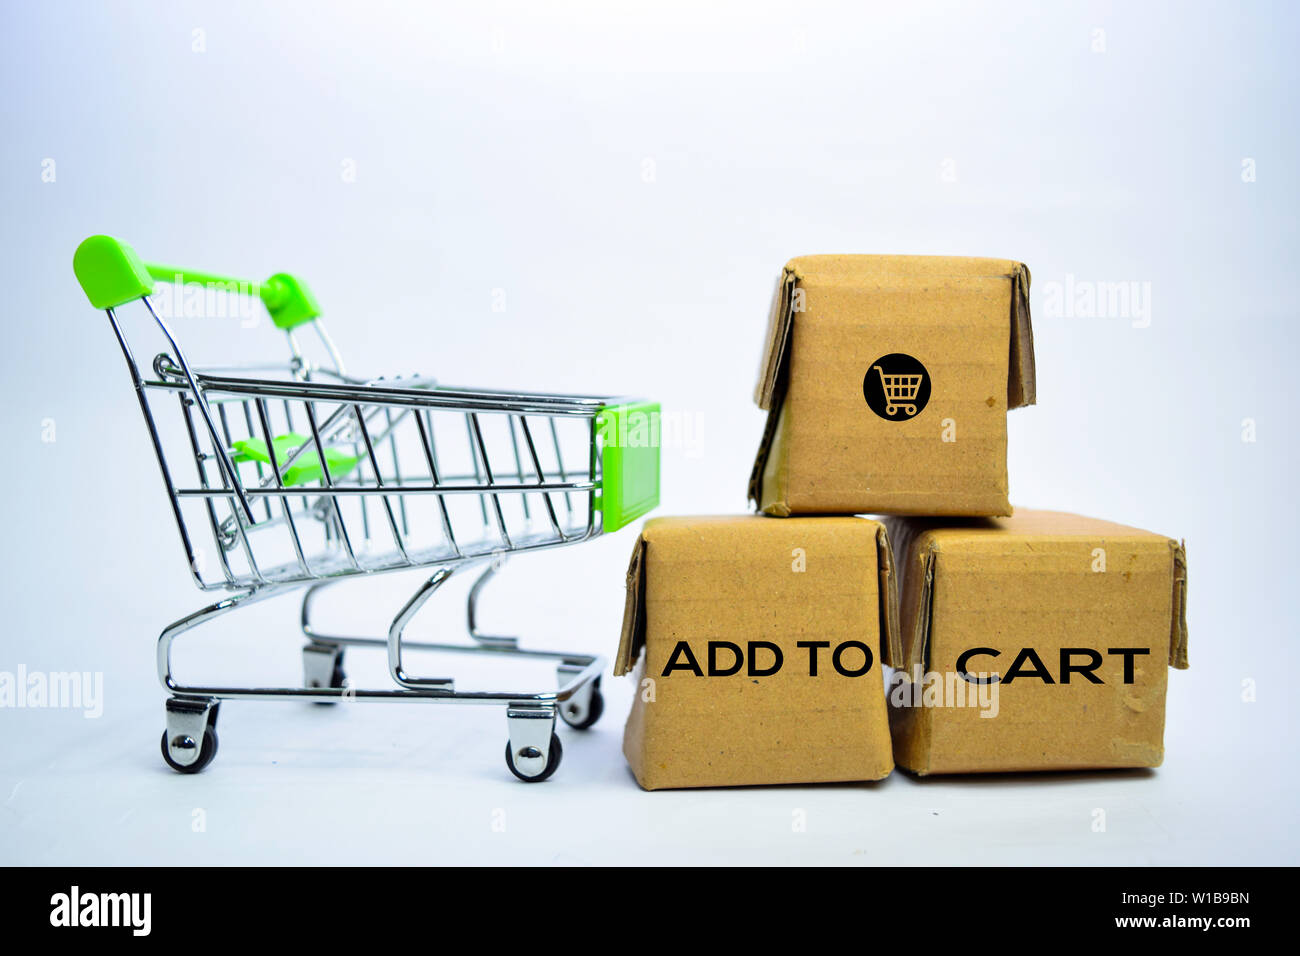 Add To Cart Text in small boxes and shopping cart. Concepts about online  shopping. Isolated on white background Stock Photo - Alamy